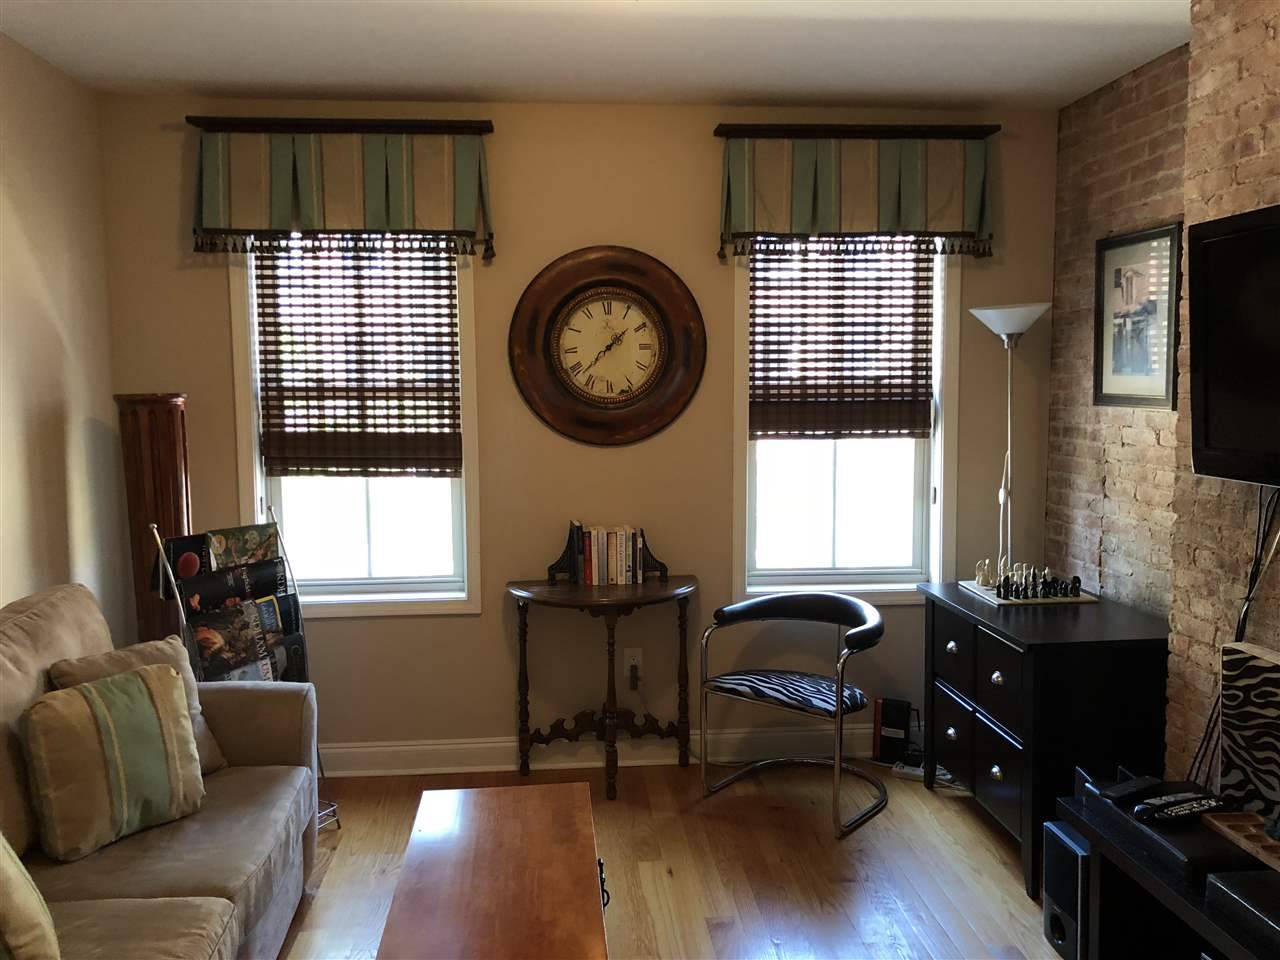 Beautiful furnished one bedroom home in desirable downtown location near Hamilton Park